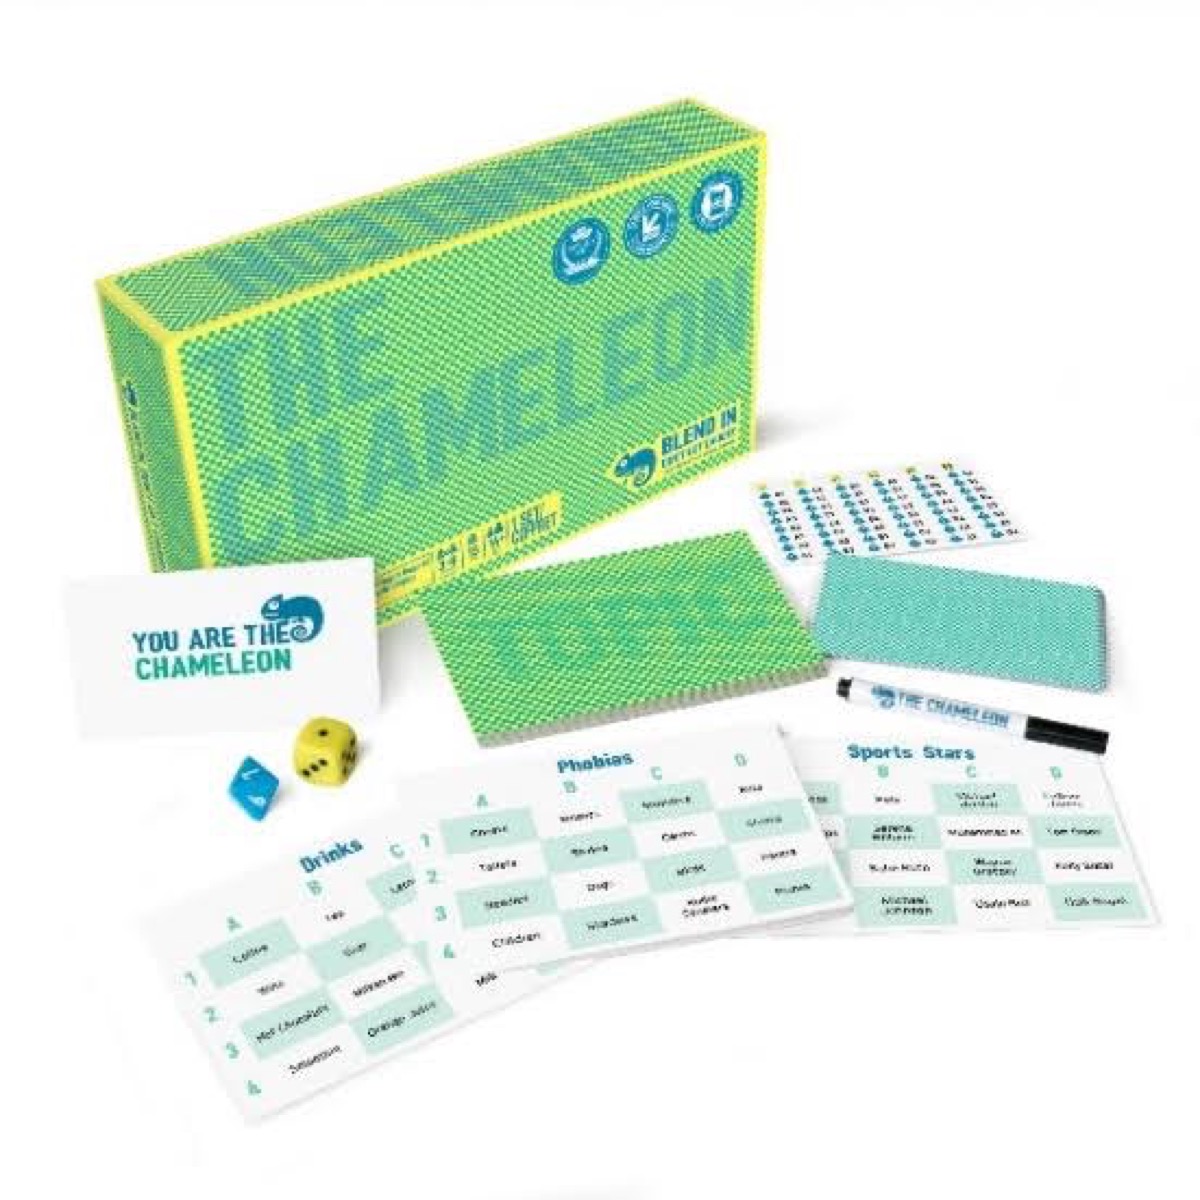 The Chameleon game in green box